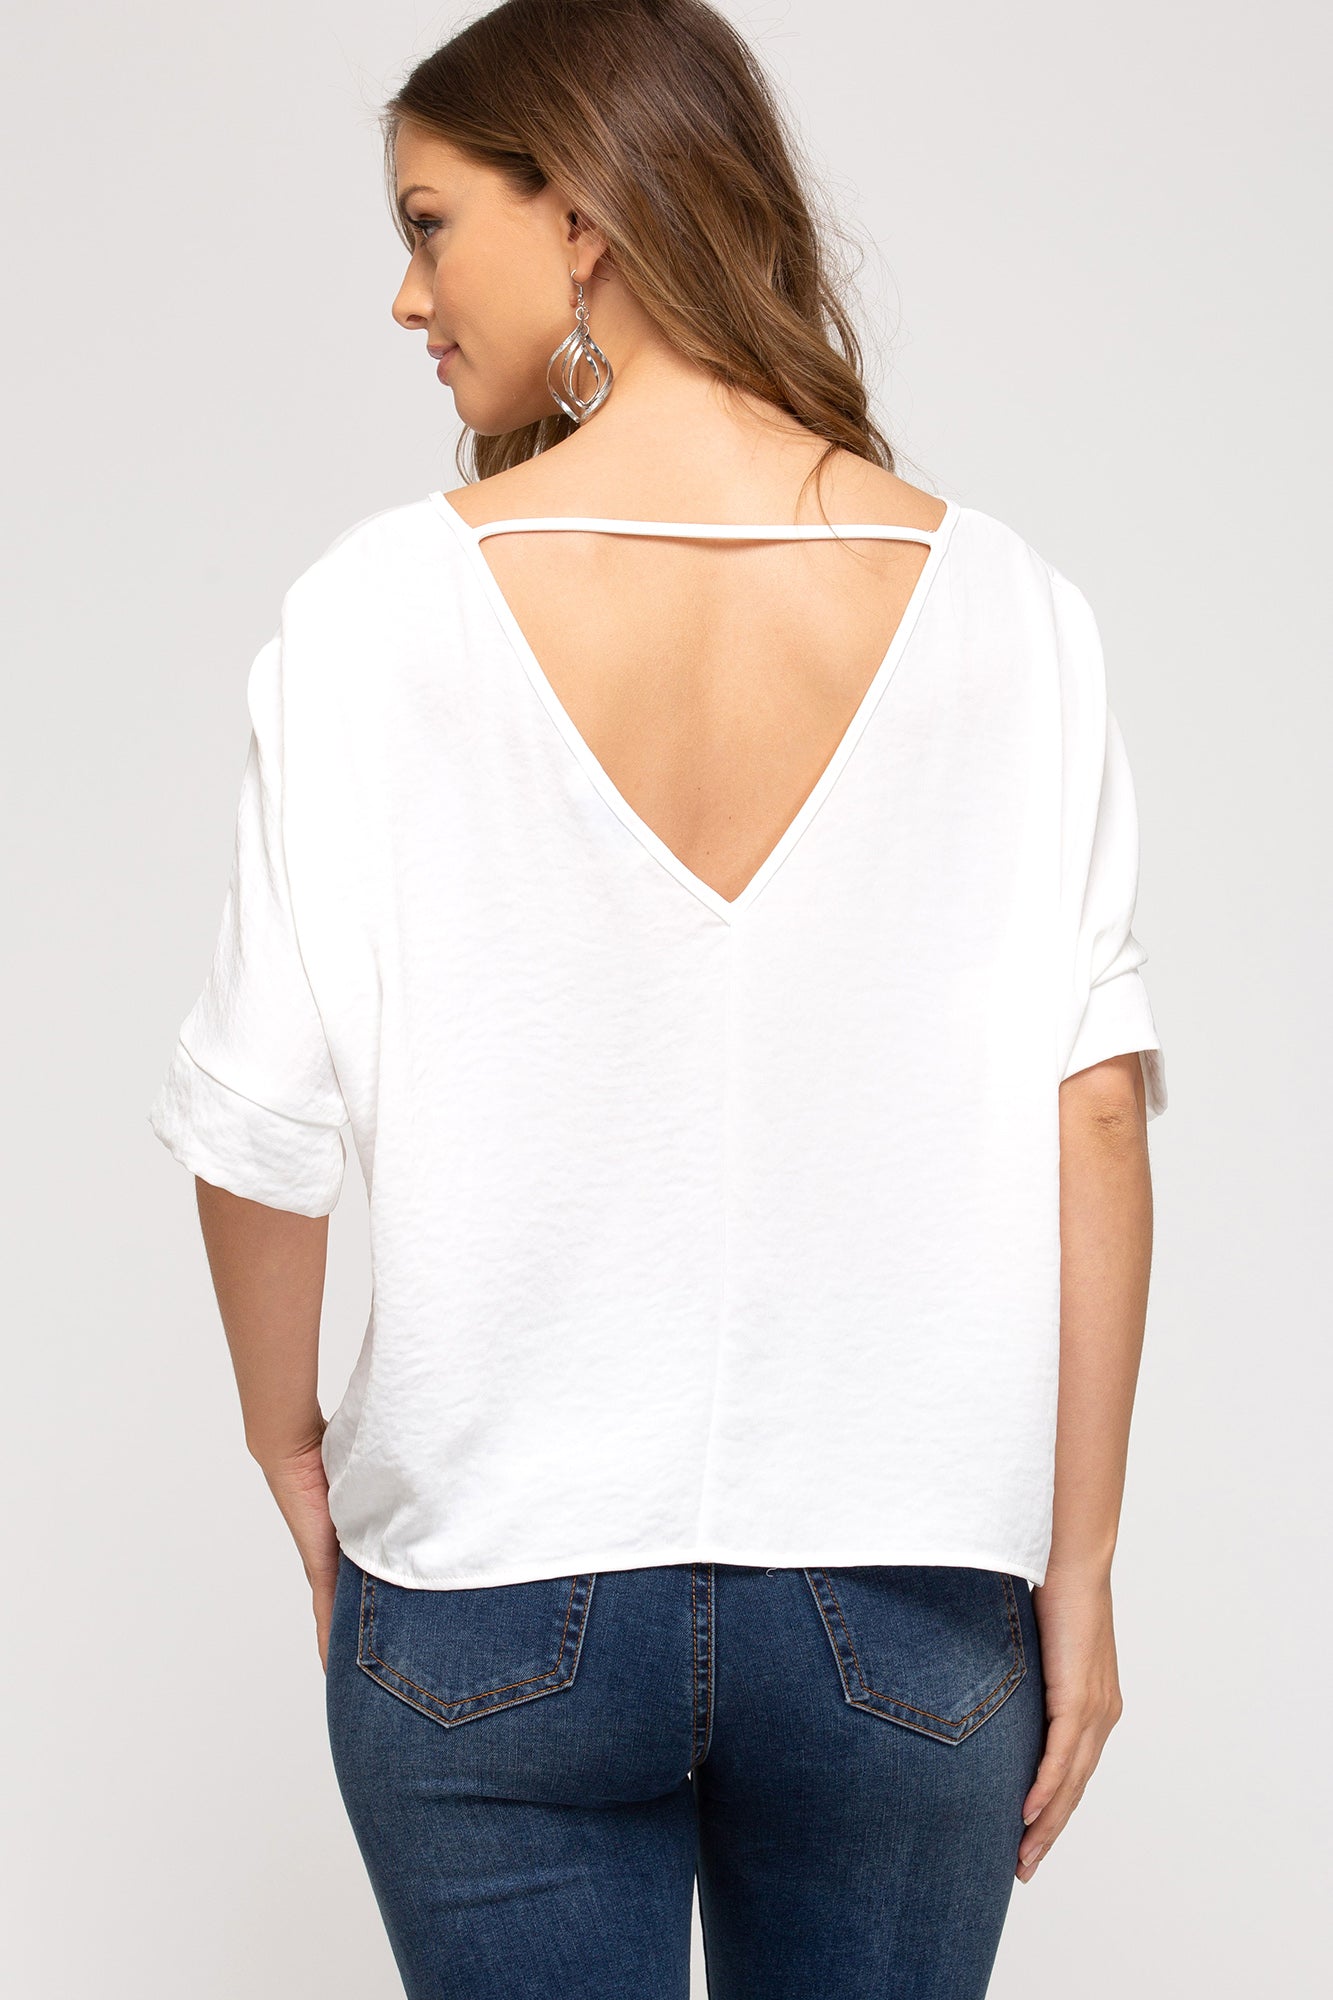 Short Sleeve Top With Open Back!